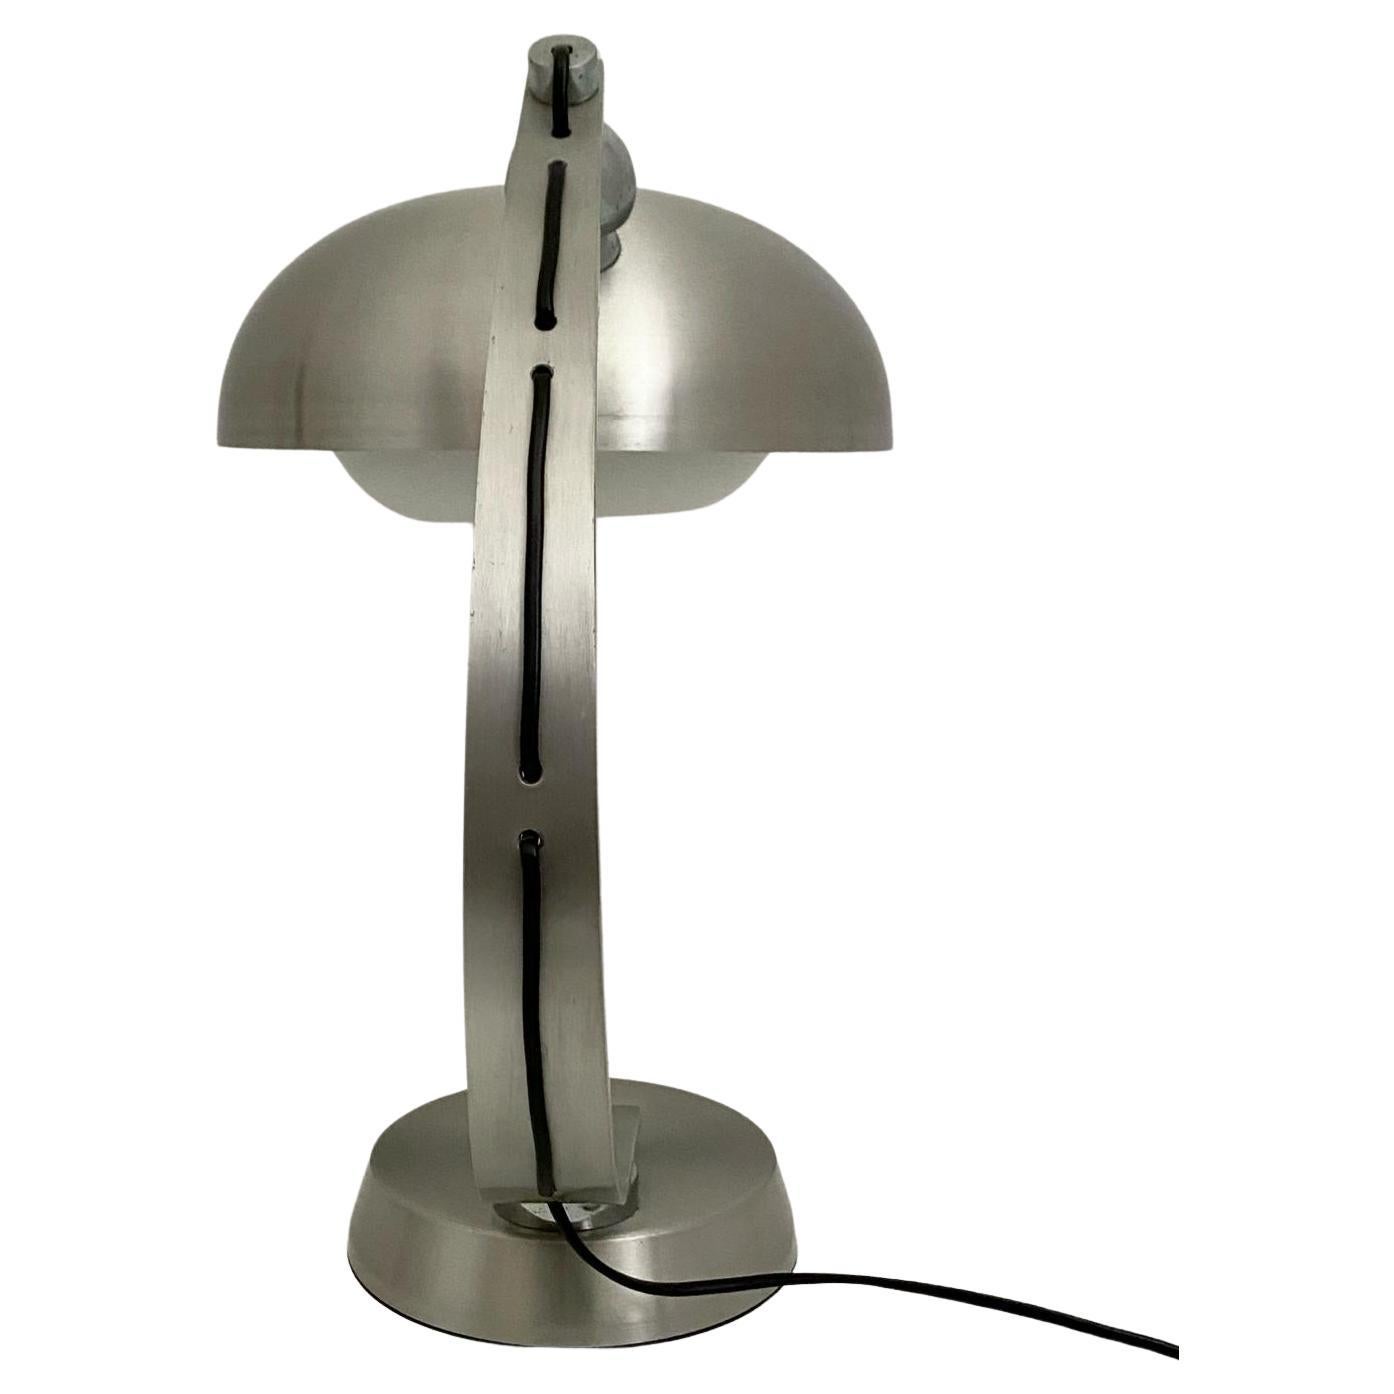 1970s vintage table lamp in industrial style. Designed by Angelo Lelli for Arredoluce in the 1970s. Aluminium structure with flexible lampshade. The lamp has been recabled whilist its structure has been refined. In really good conditions with only